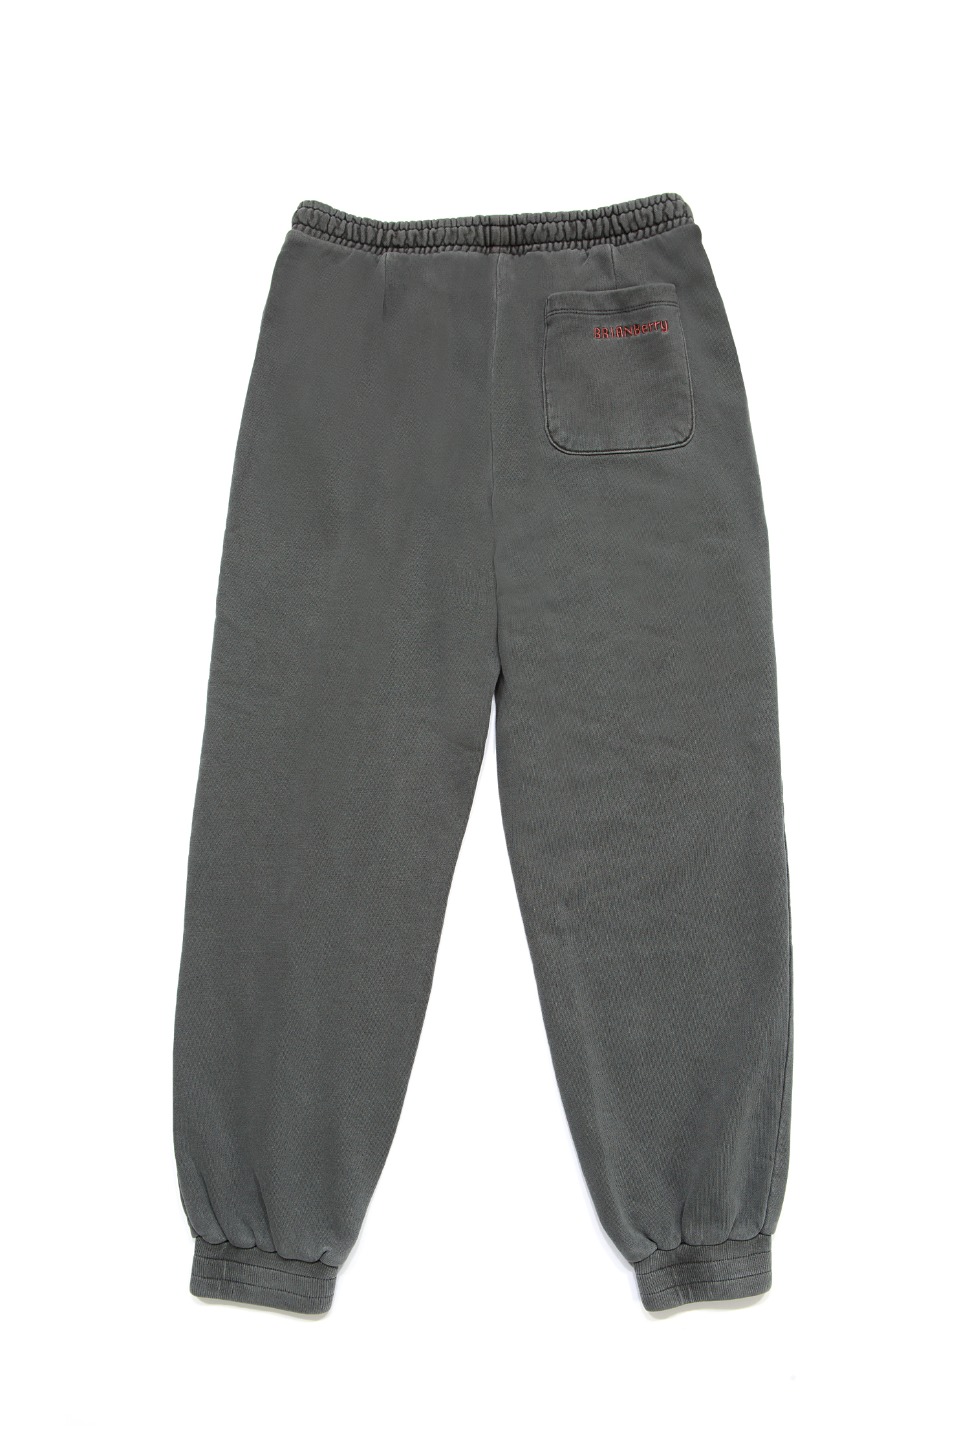 MOSES DYEING PANTS_GREY